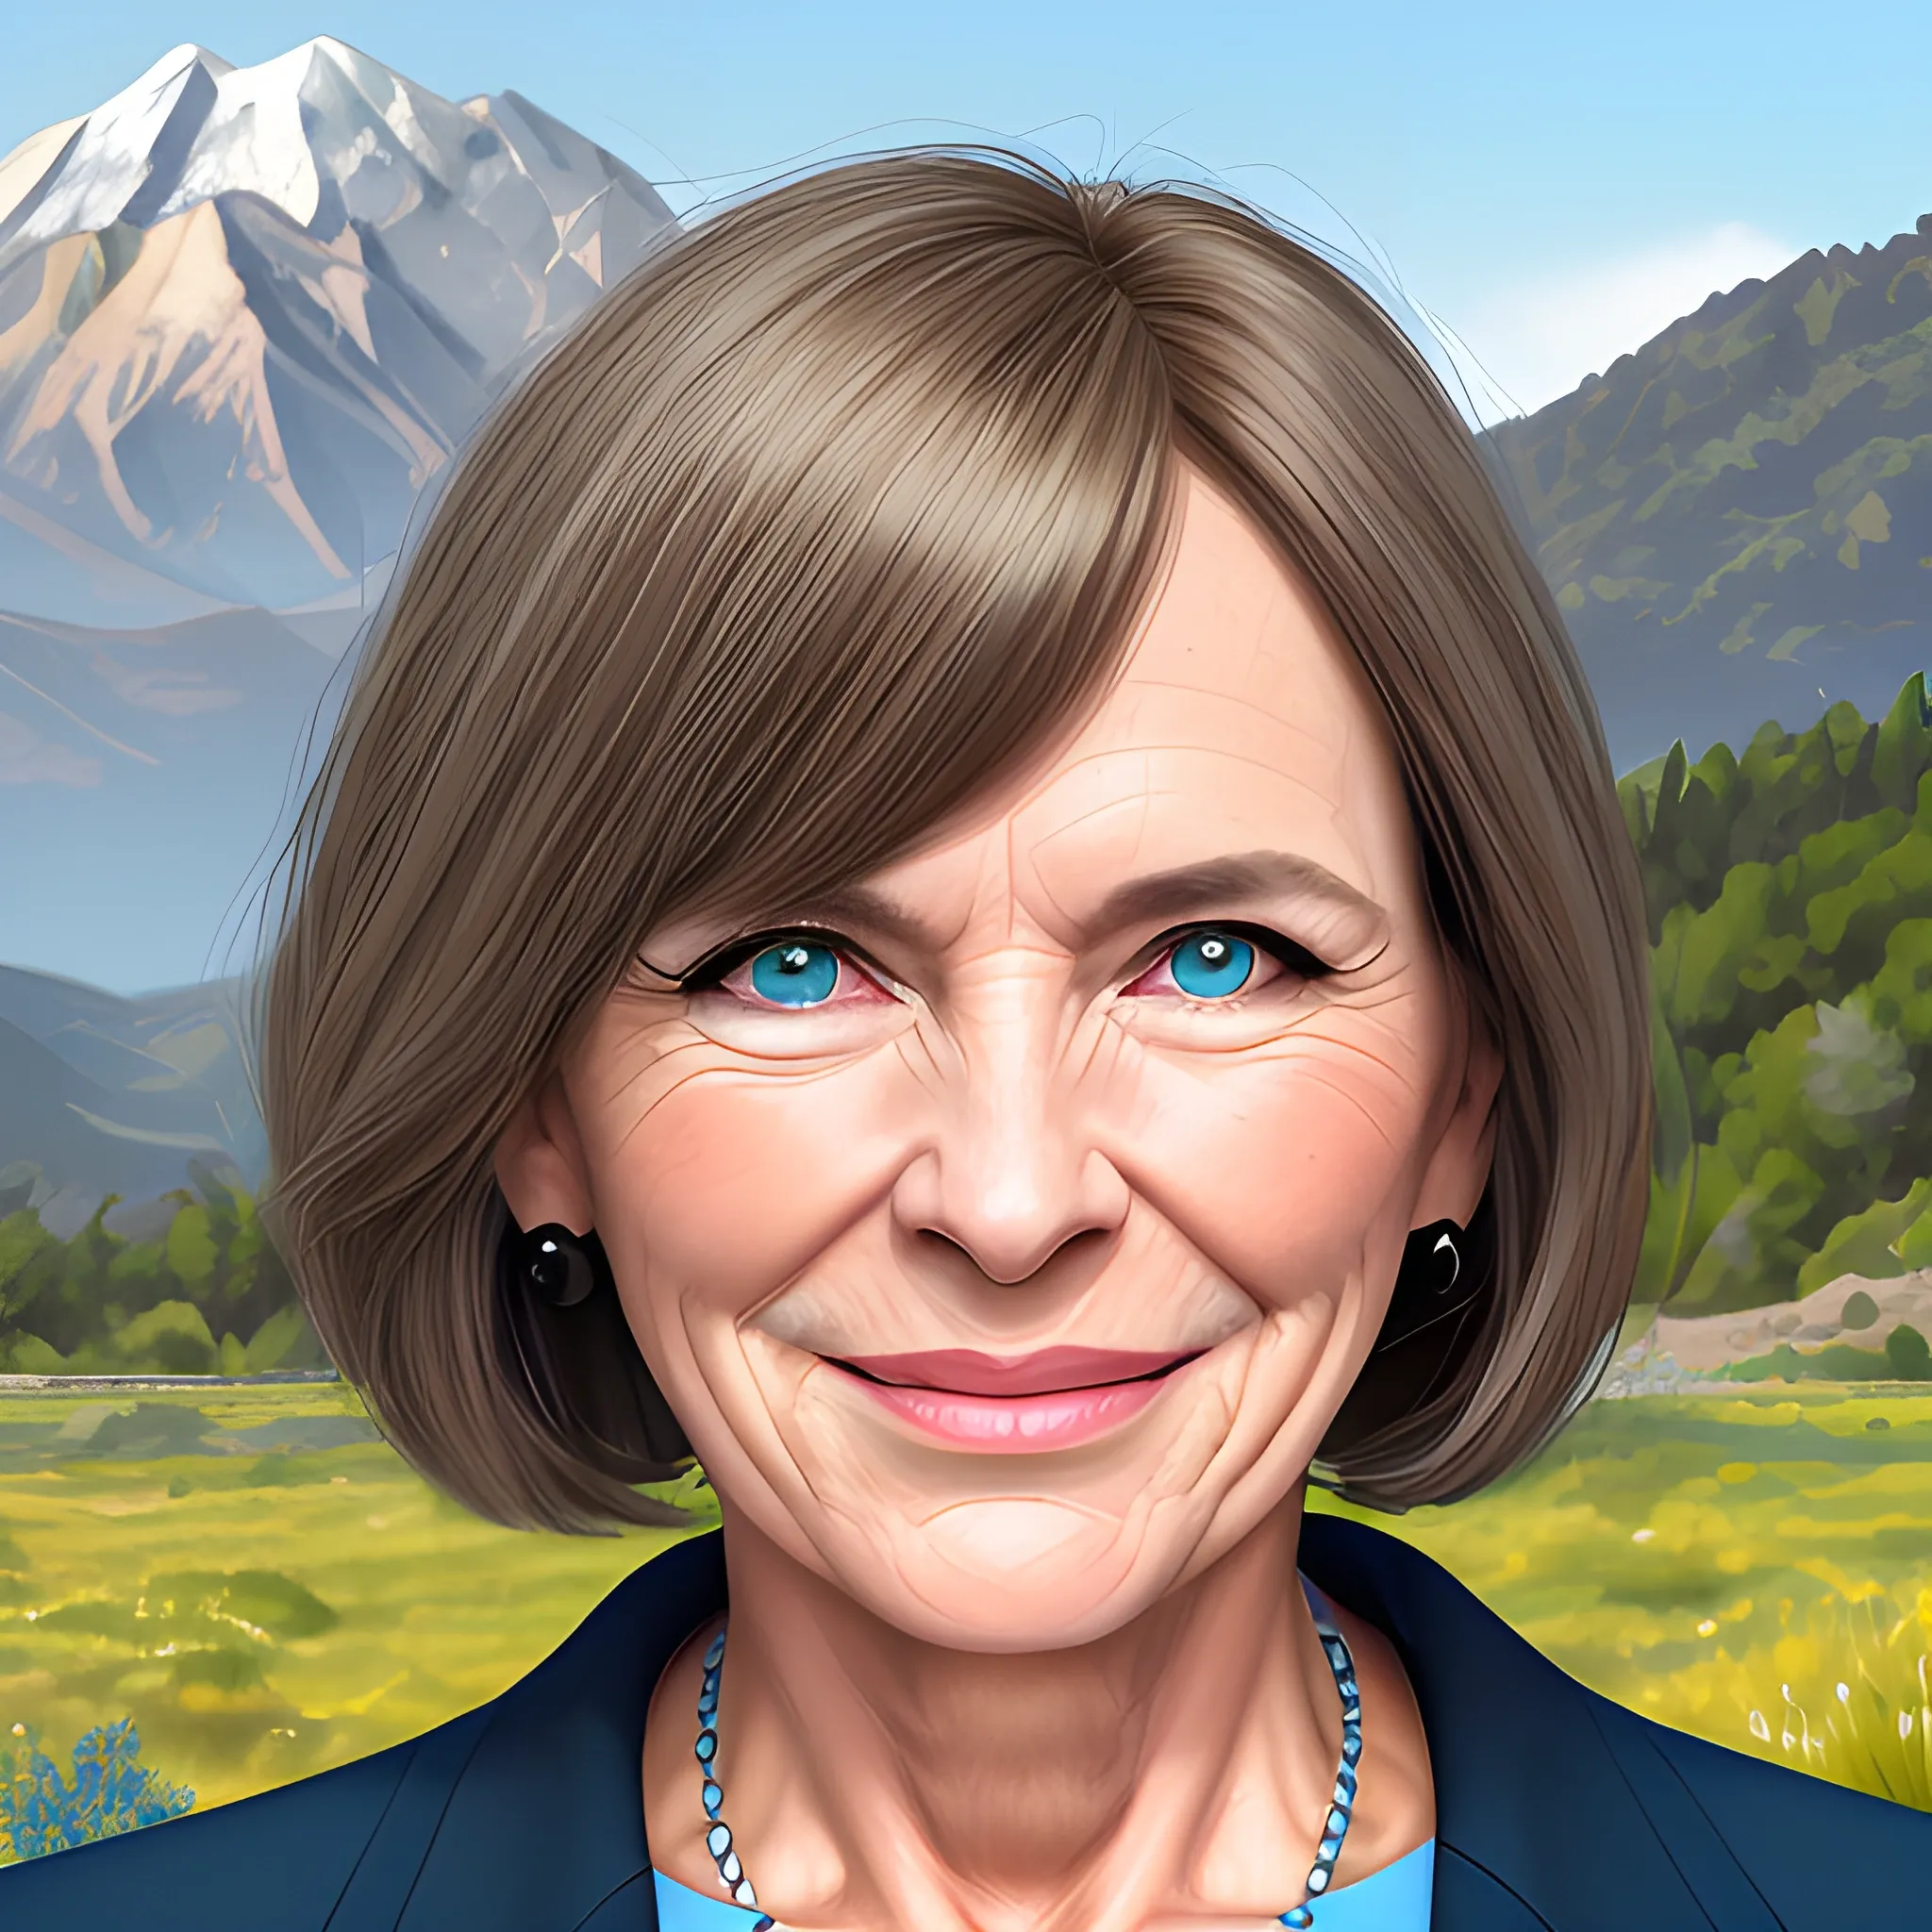 portrait of a 40 plus aged woman, dark blond hair with timeless bob with bangs, attractive, symmetrical, kind, strong, smiling, highly detailed portrait, bright open green/blue eyes, mont canigou landscape in background, realistic digital art 